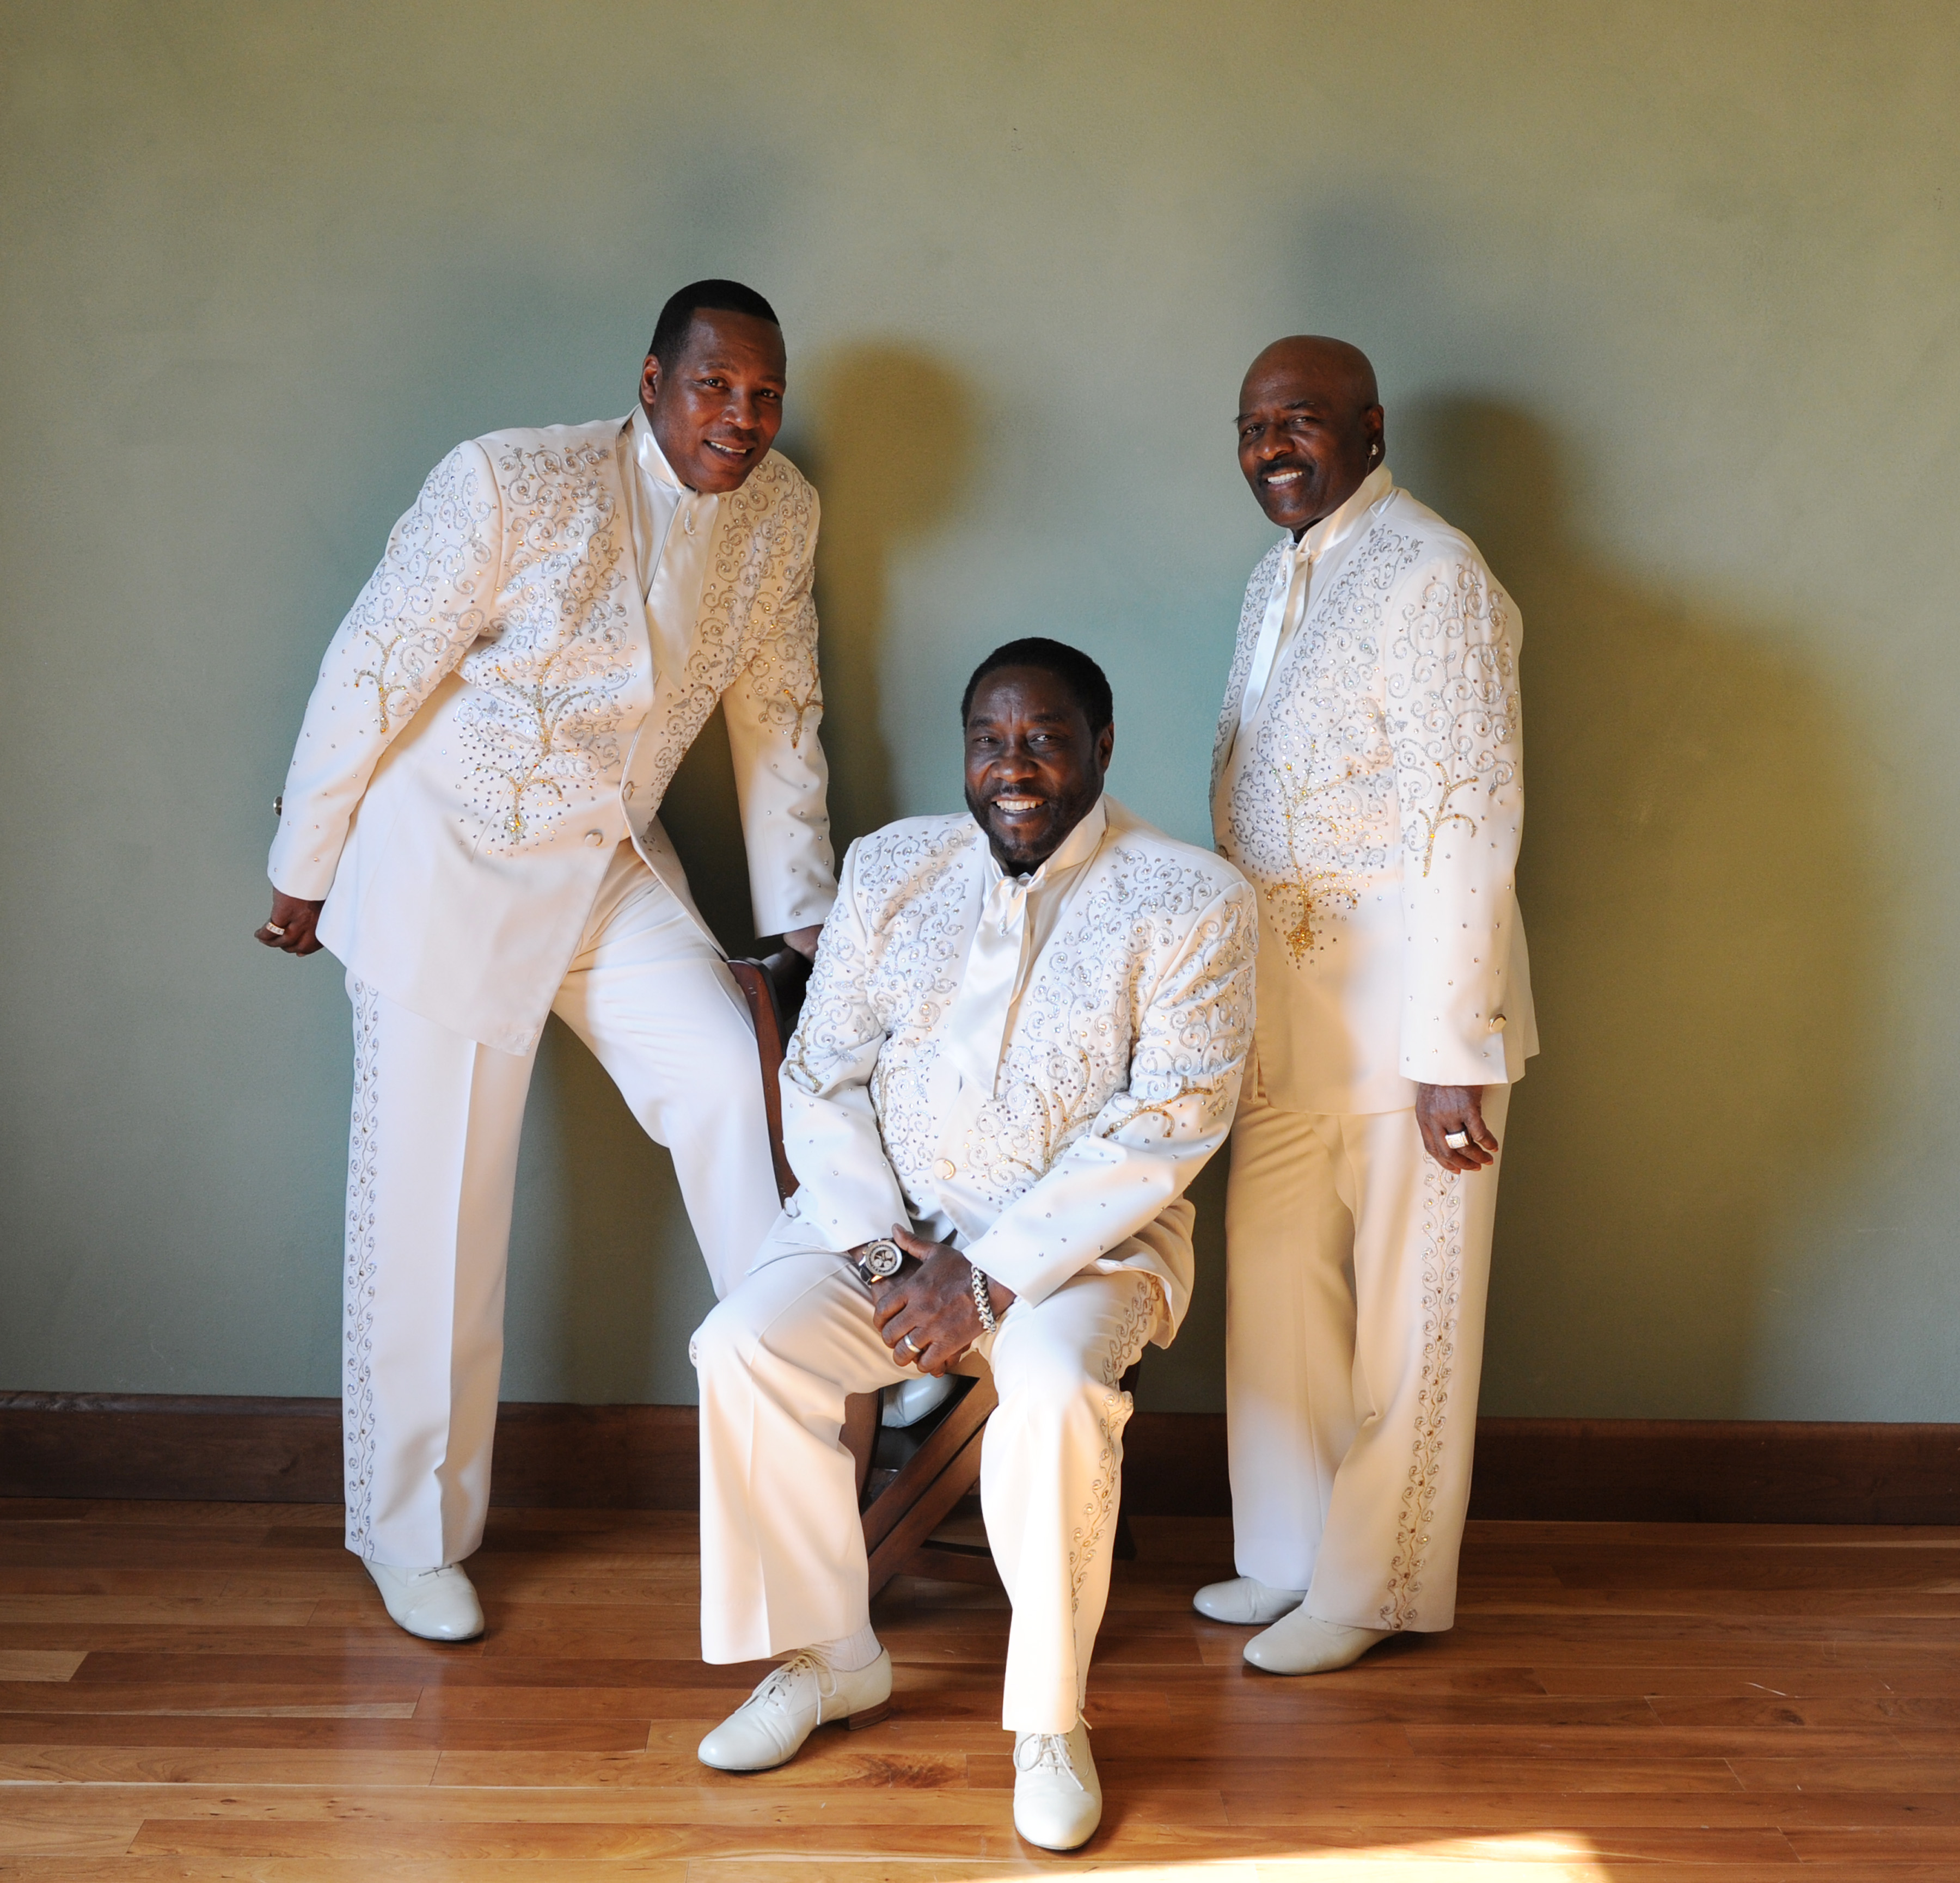 The O’Jays have continued to build a new generation of fans decade after decade. (Submitted photo)